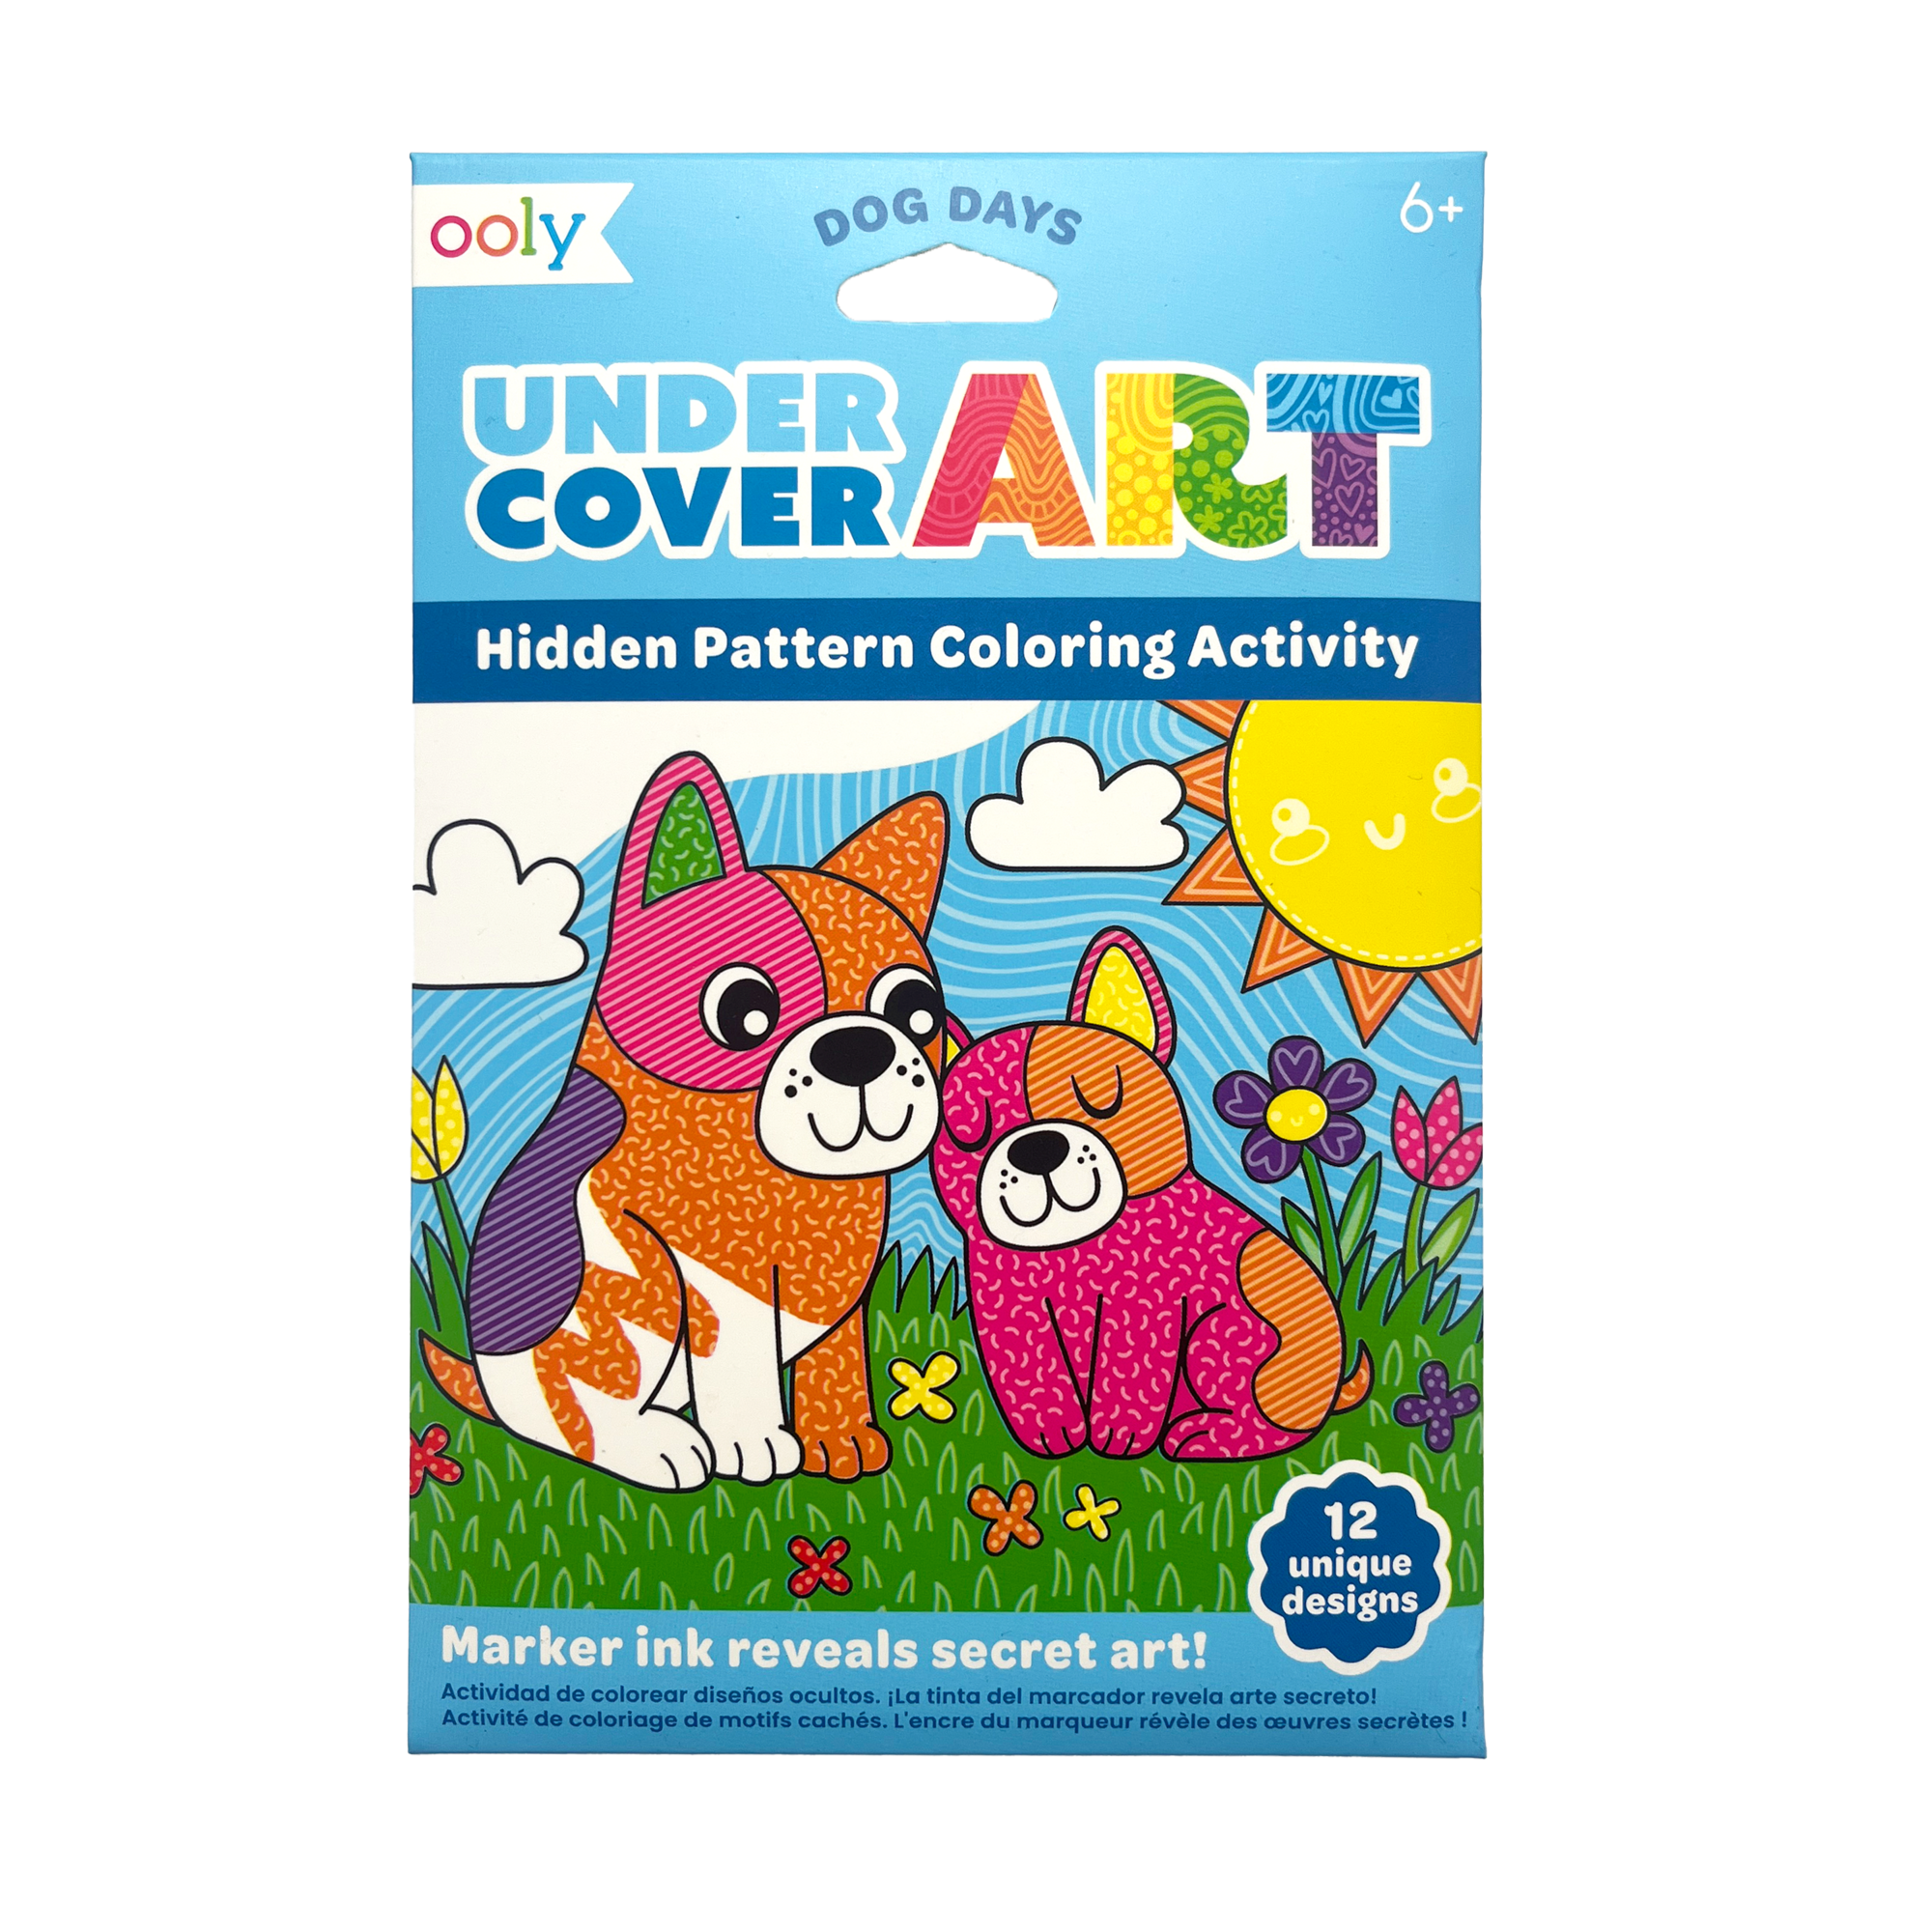 OOLY Undercover Art Hidden Pattern Coloring Activity Art Cards - Dog Days  front of packaging